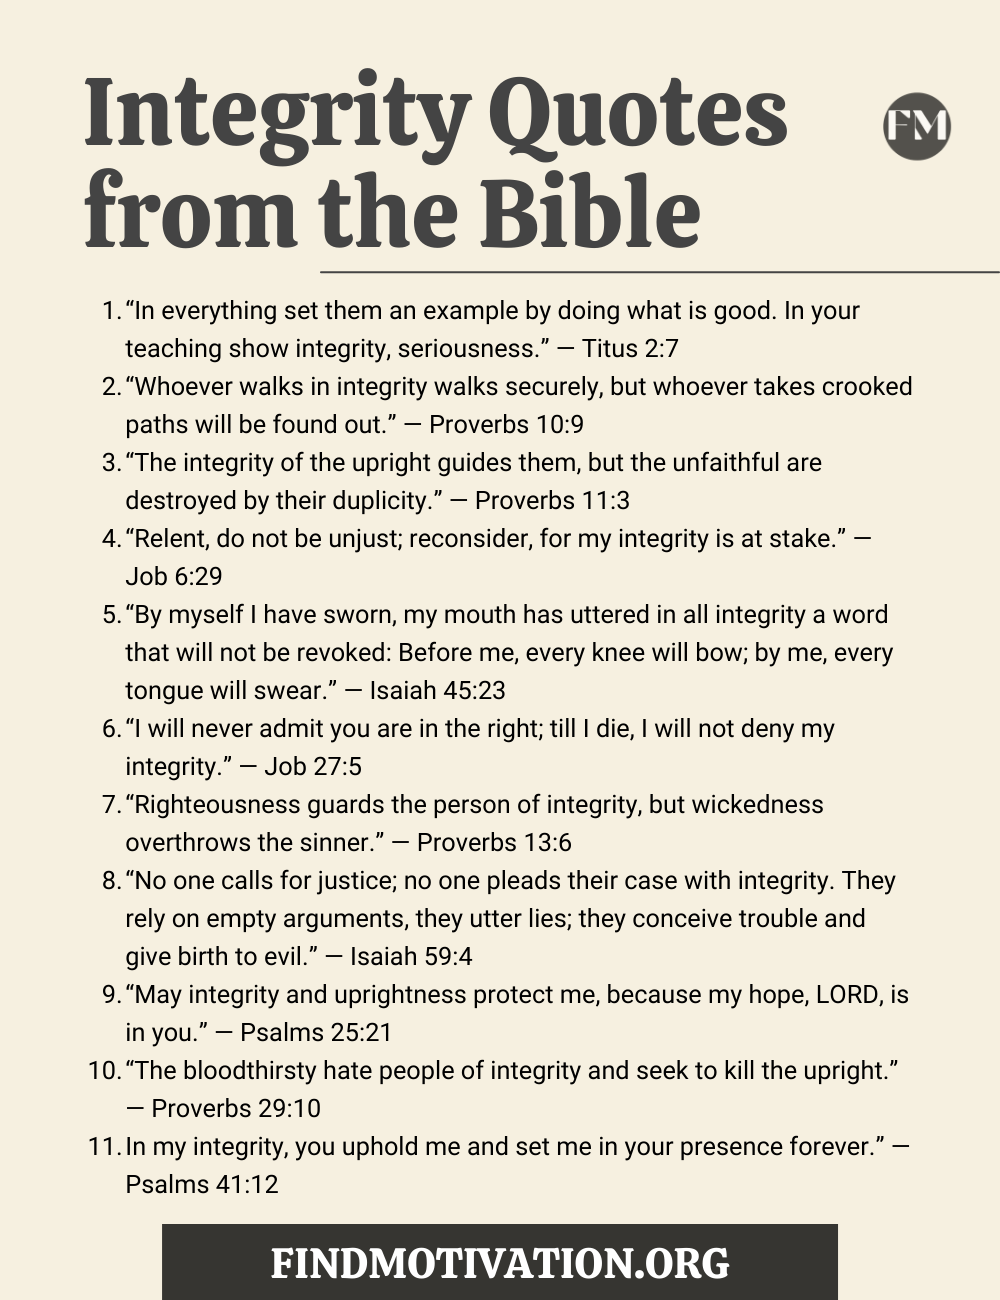 Bible Integrity Quotes